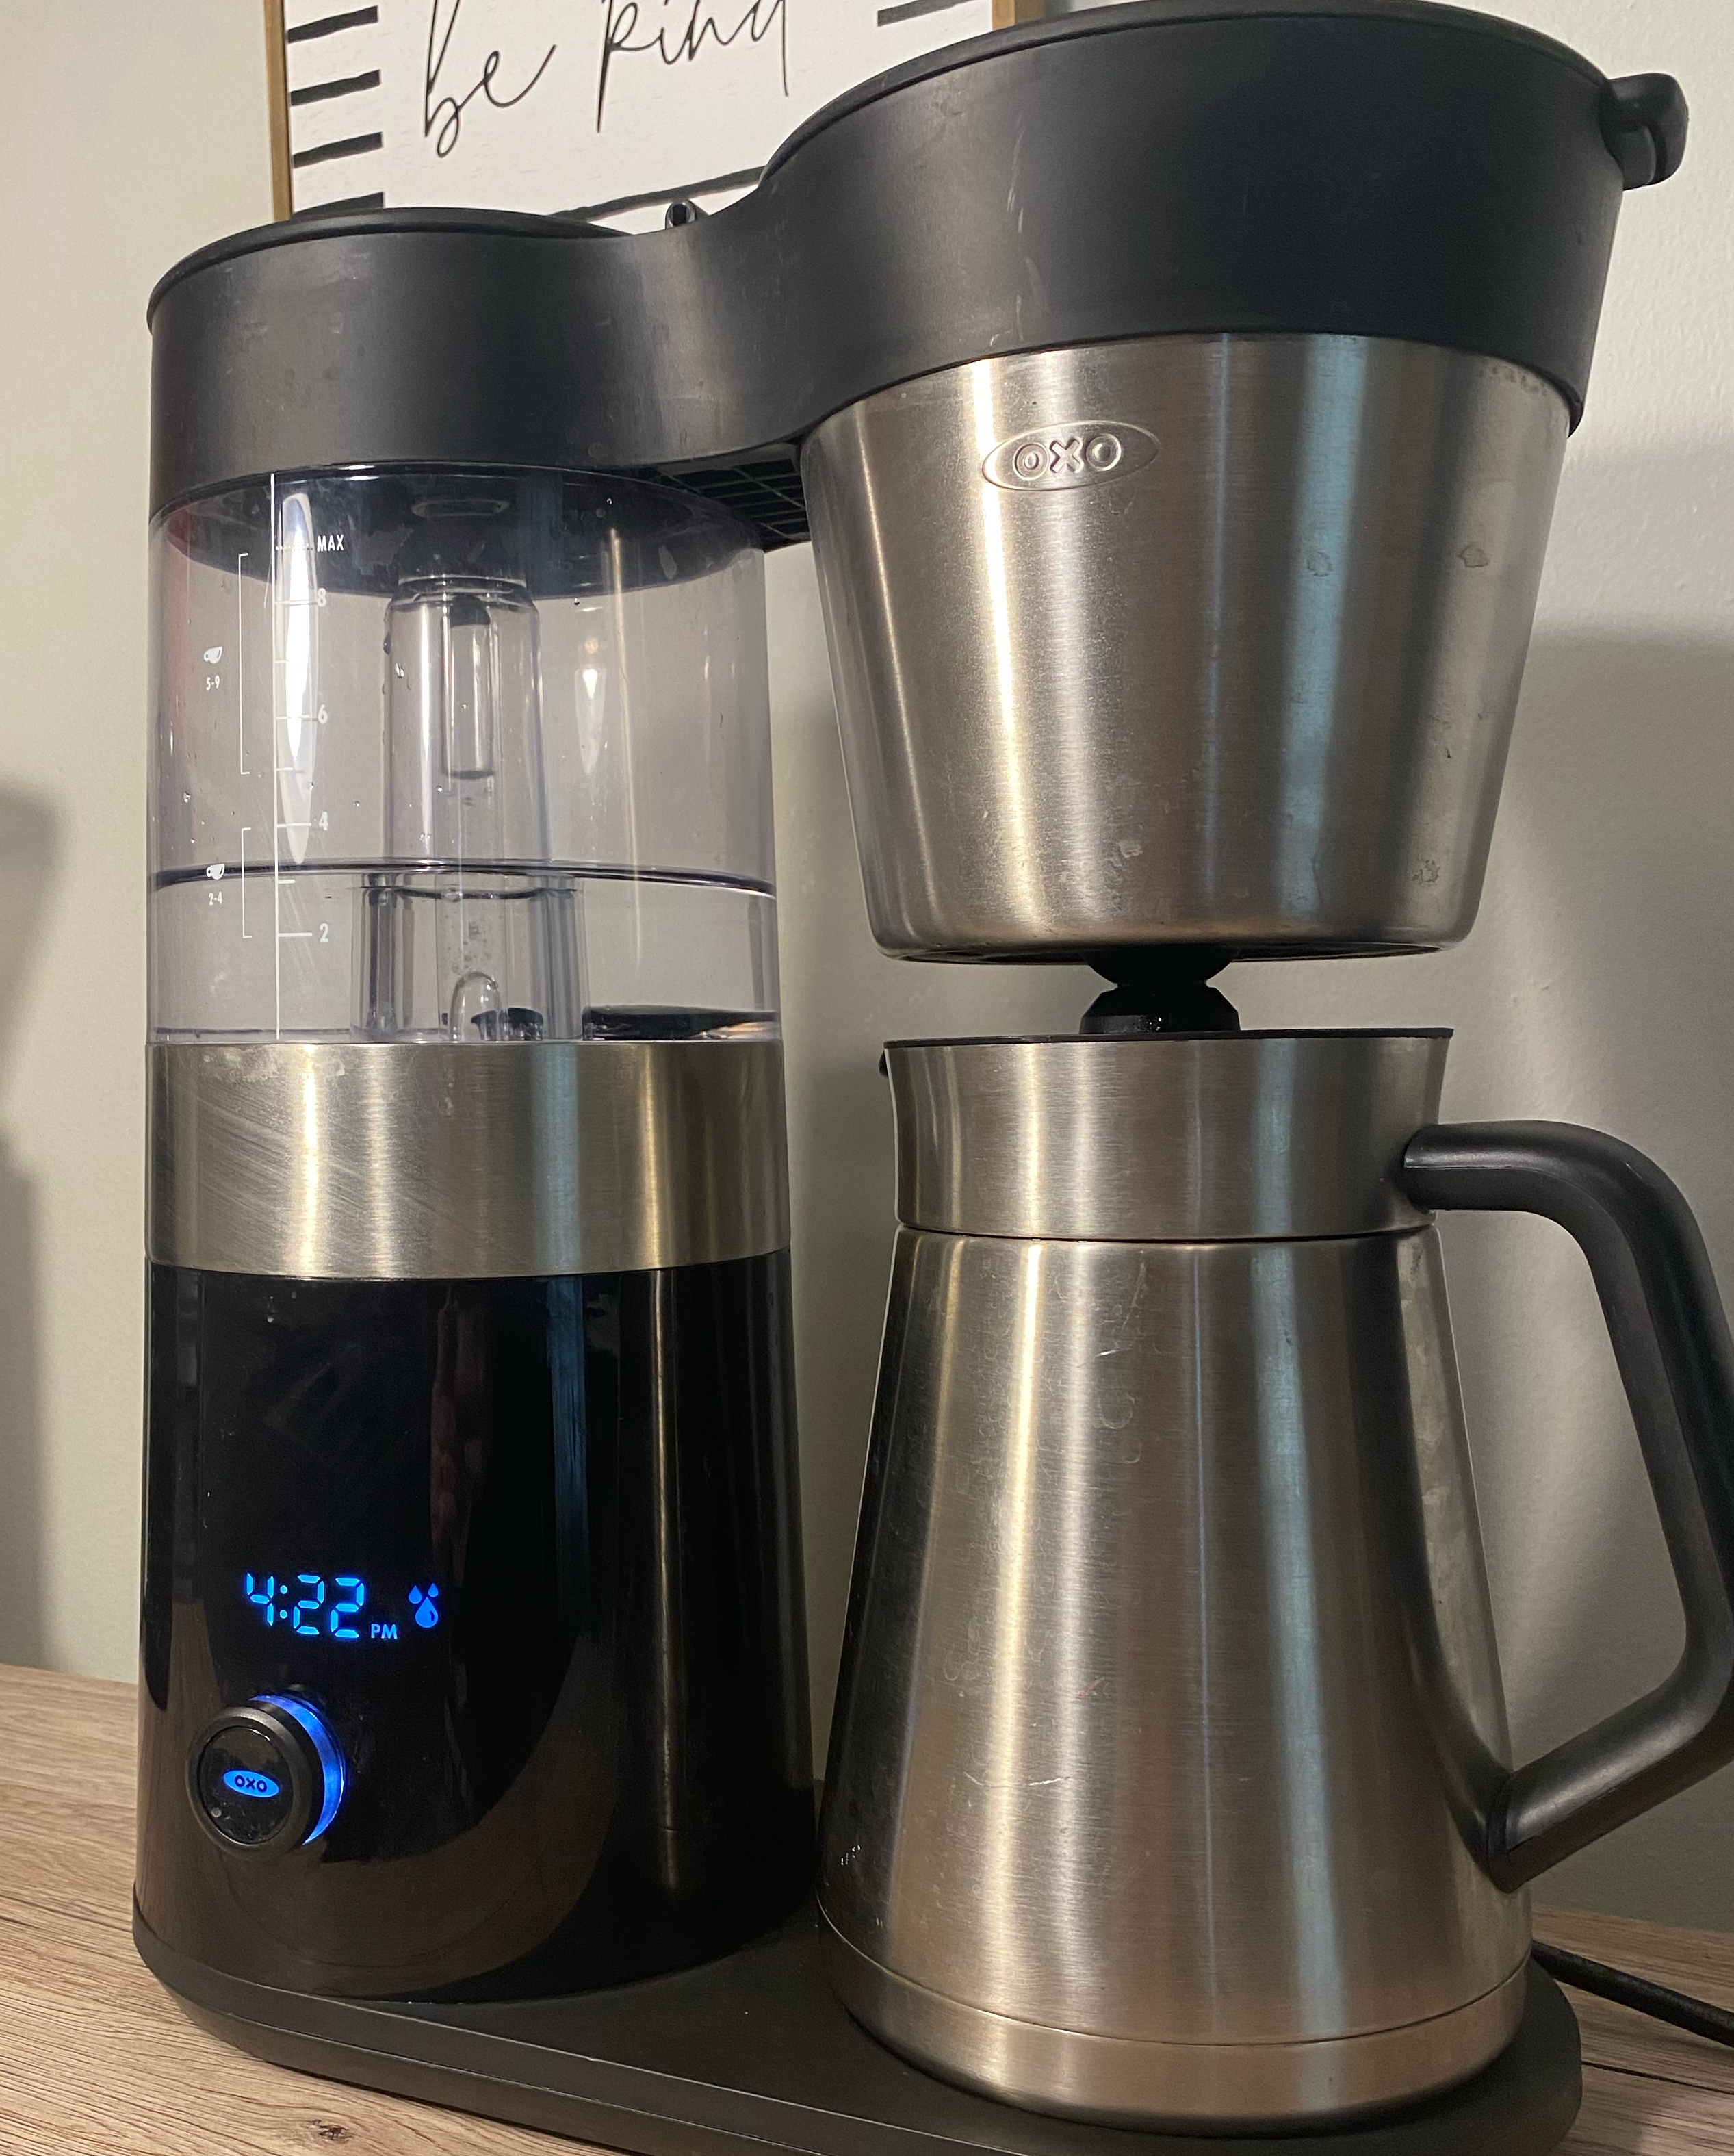 OXO 9-cup Coffee Maker